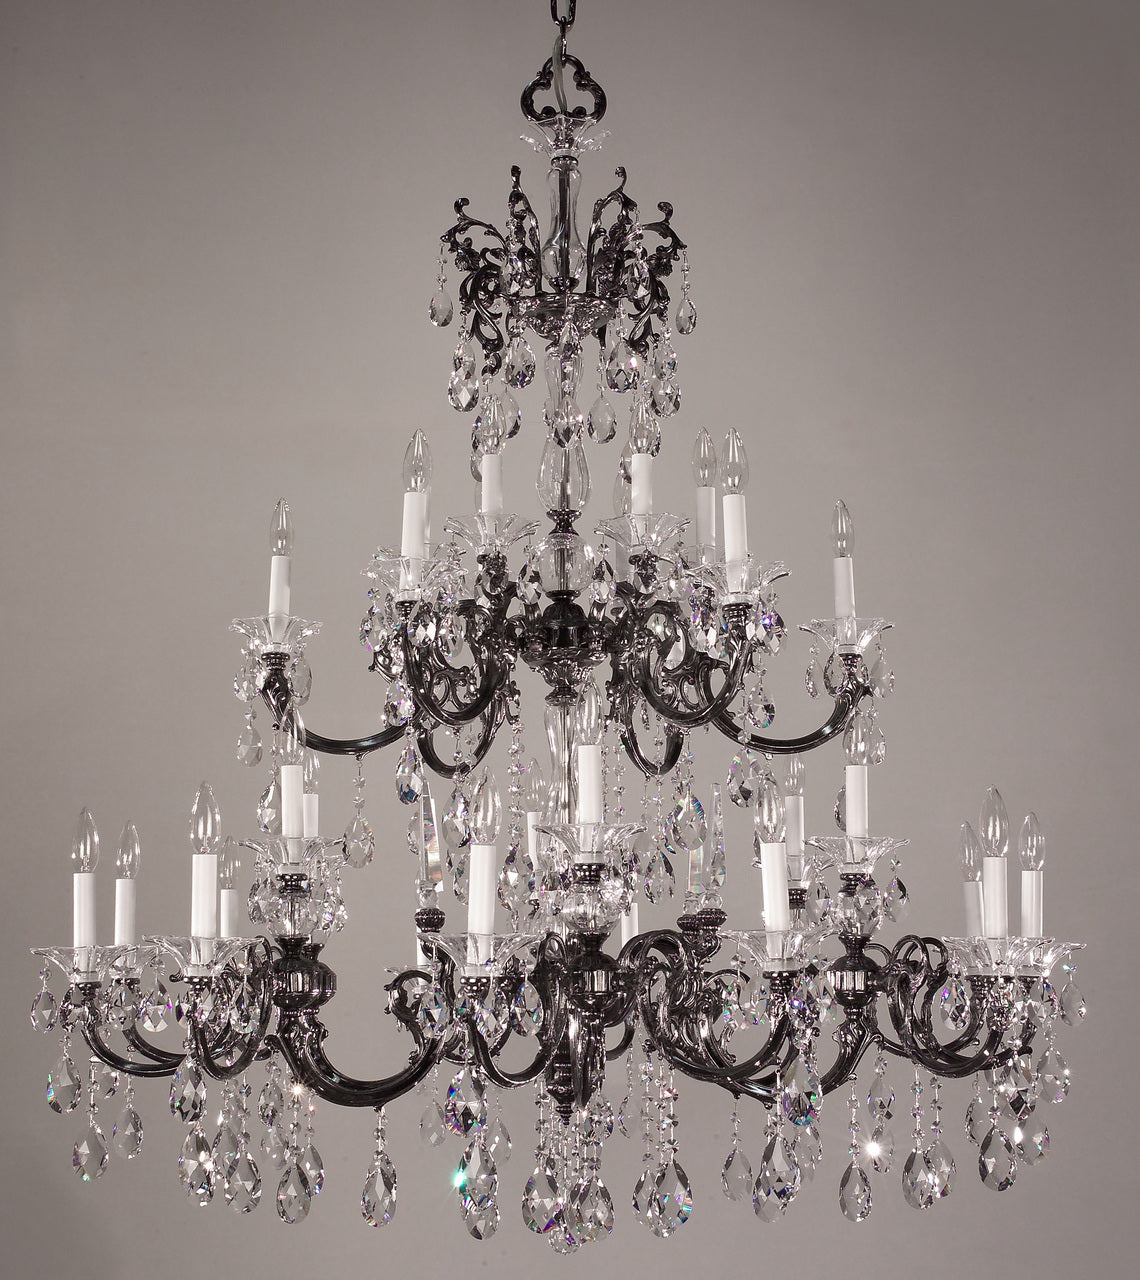 Classic Lighting 57060 G SJT Via Lombardi Crystal Chandelier in 24k Gold (Imported from Spain)